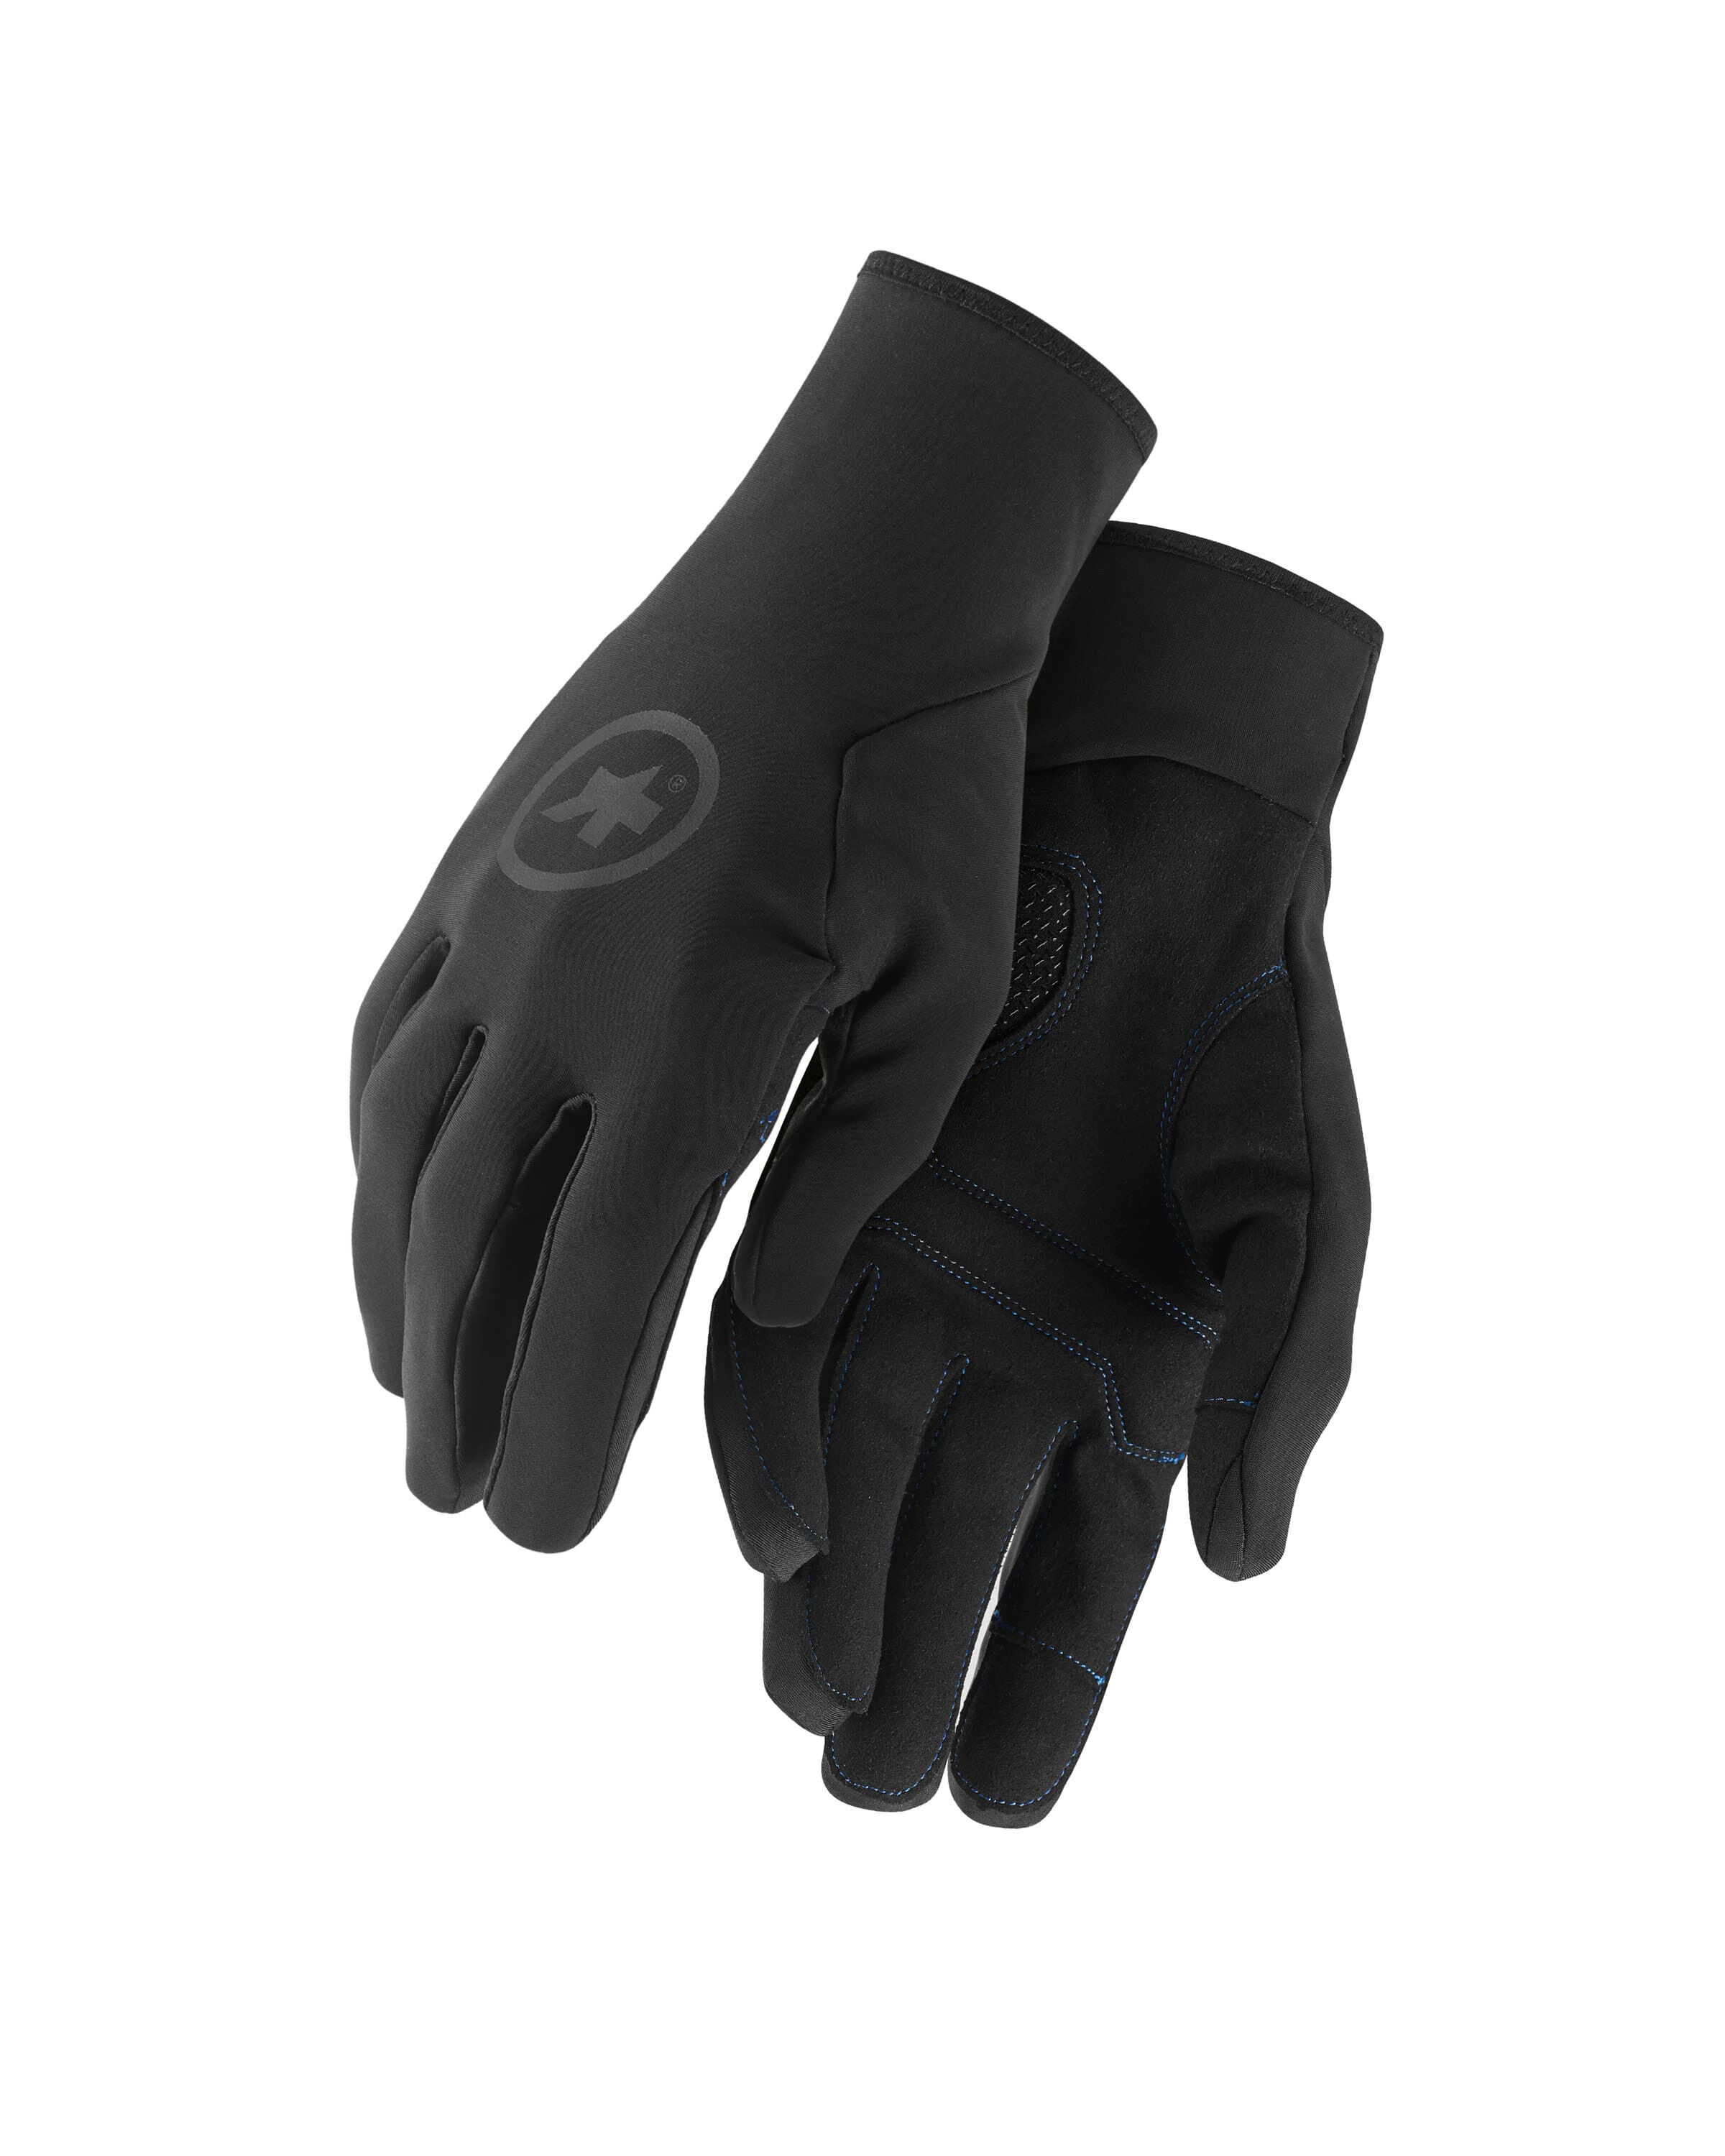 Assos Winter Gloves - Guanti ciclismo